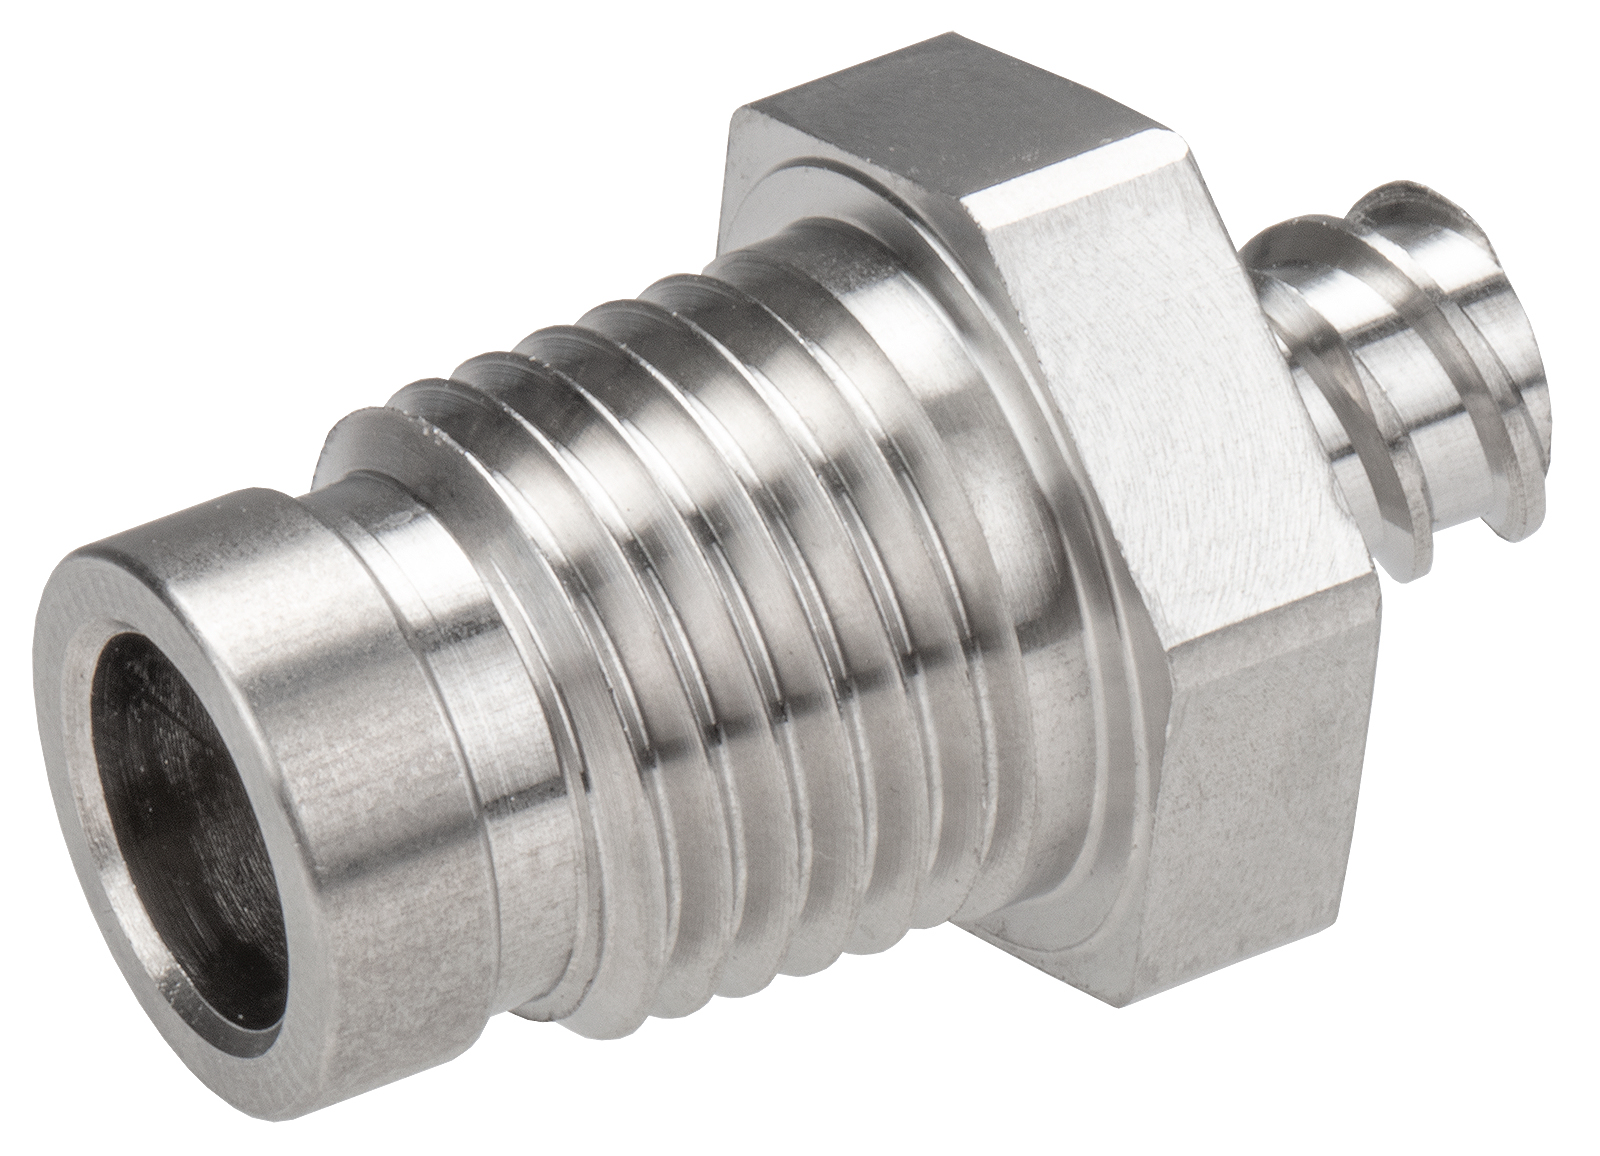 Luer-Lock (female) with NPT-1/4 thread, stainless steel 1.4305, with sealing area